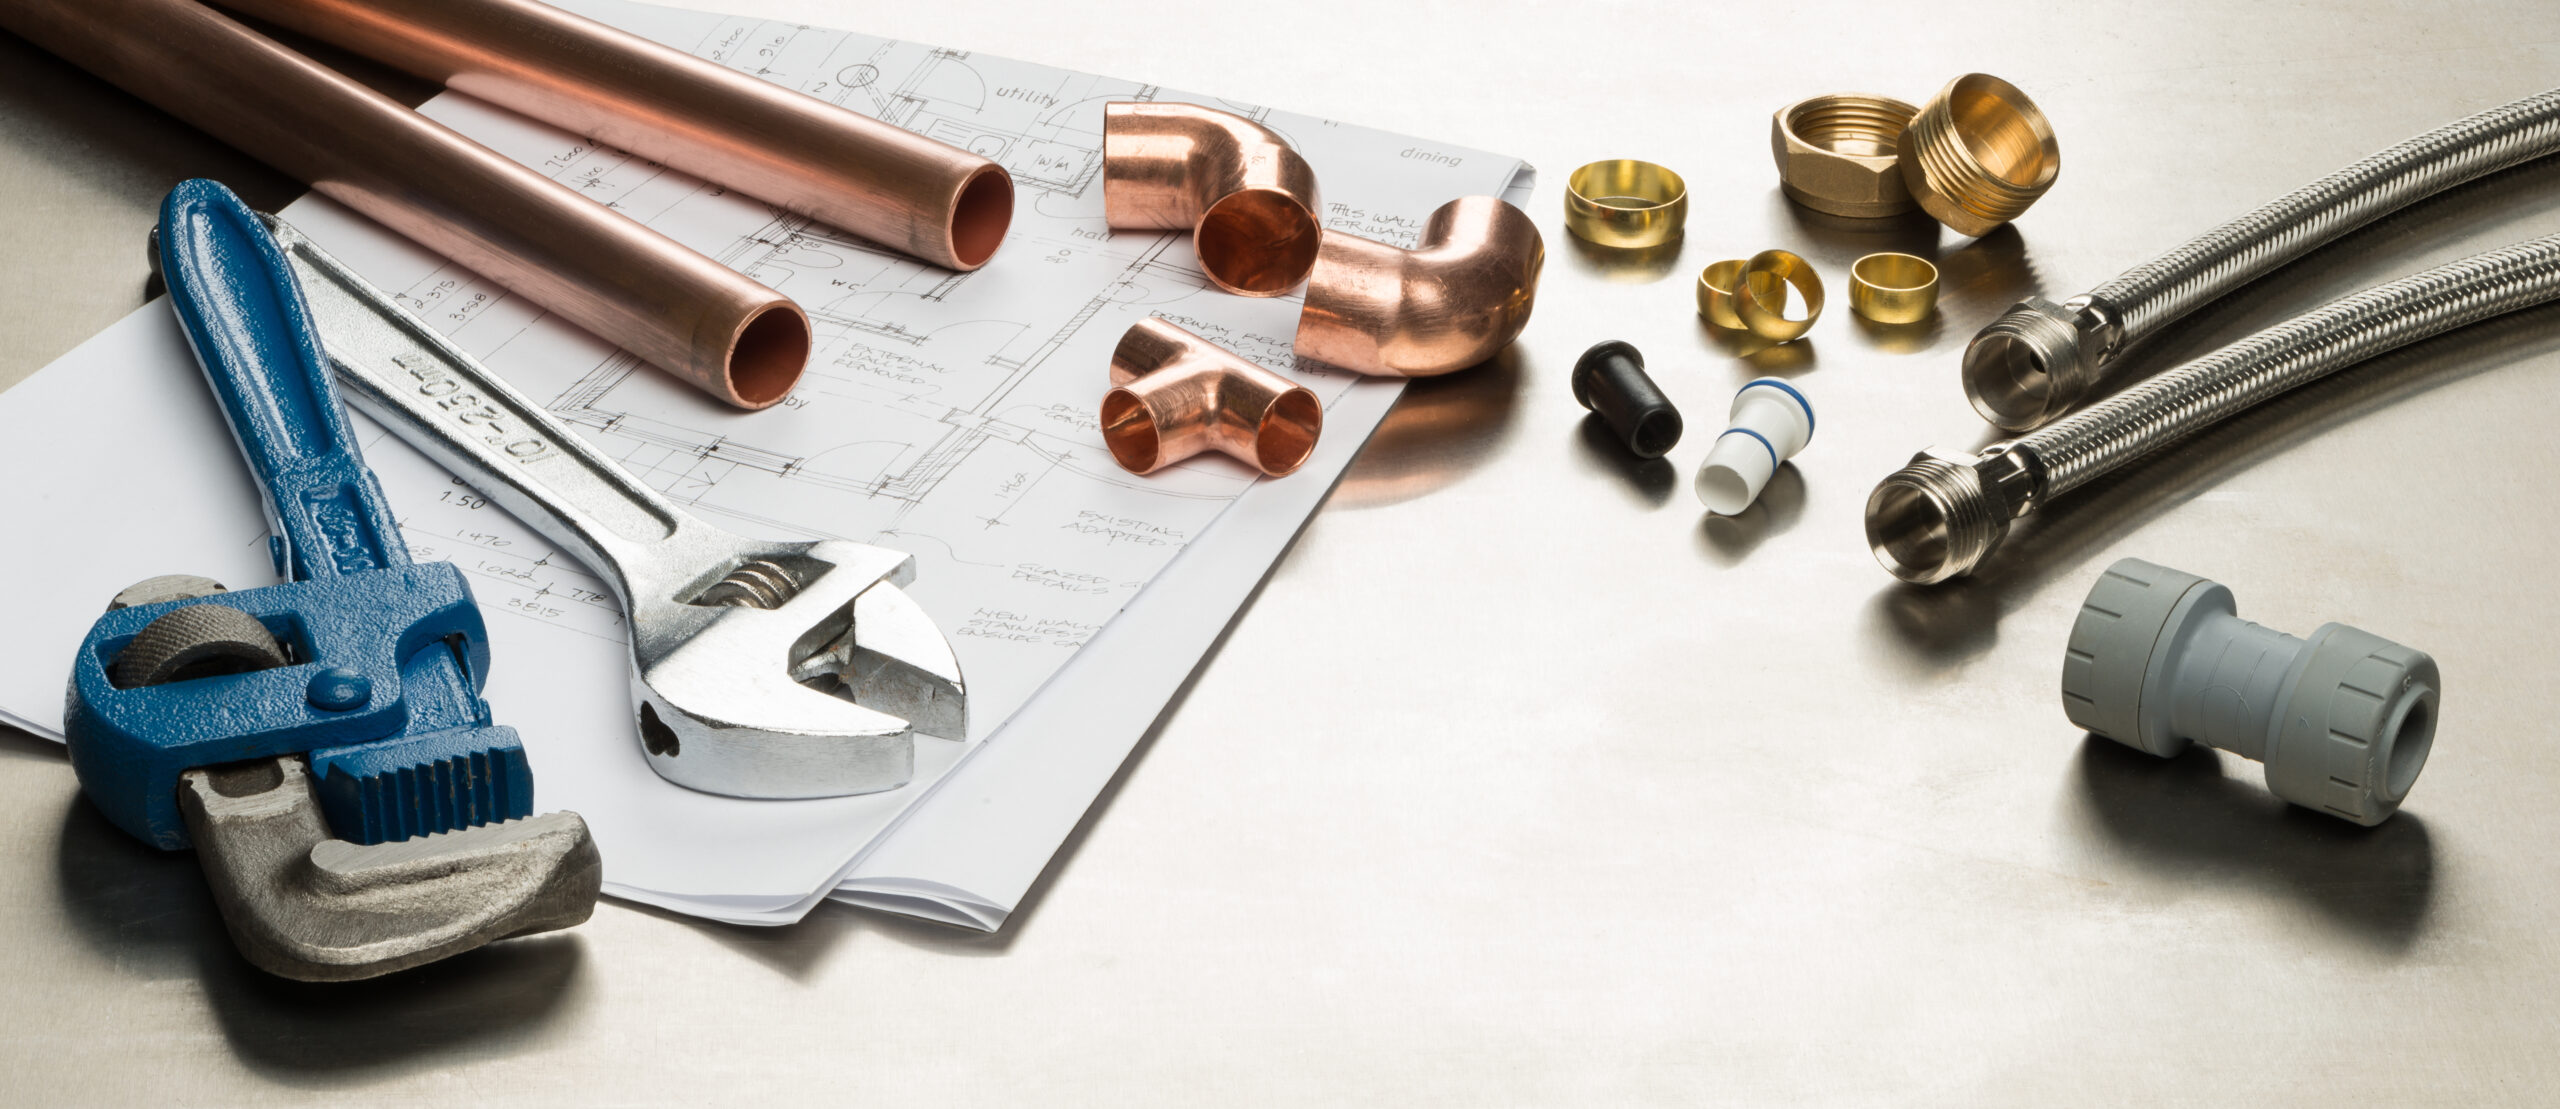 Unlock the secrets of plumbing a house from scratch! From pipe installation to system design, our comprehensive guide covers all you need to ensure a solid foundation for your home's plumbing.